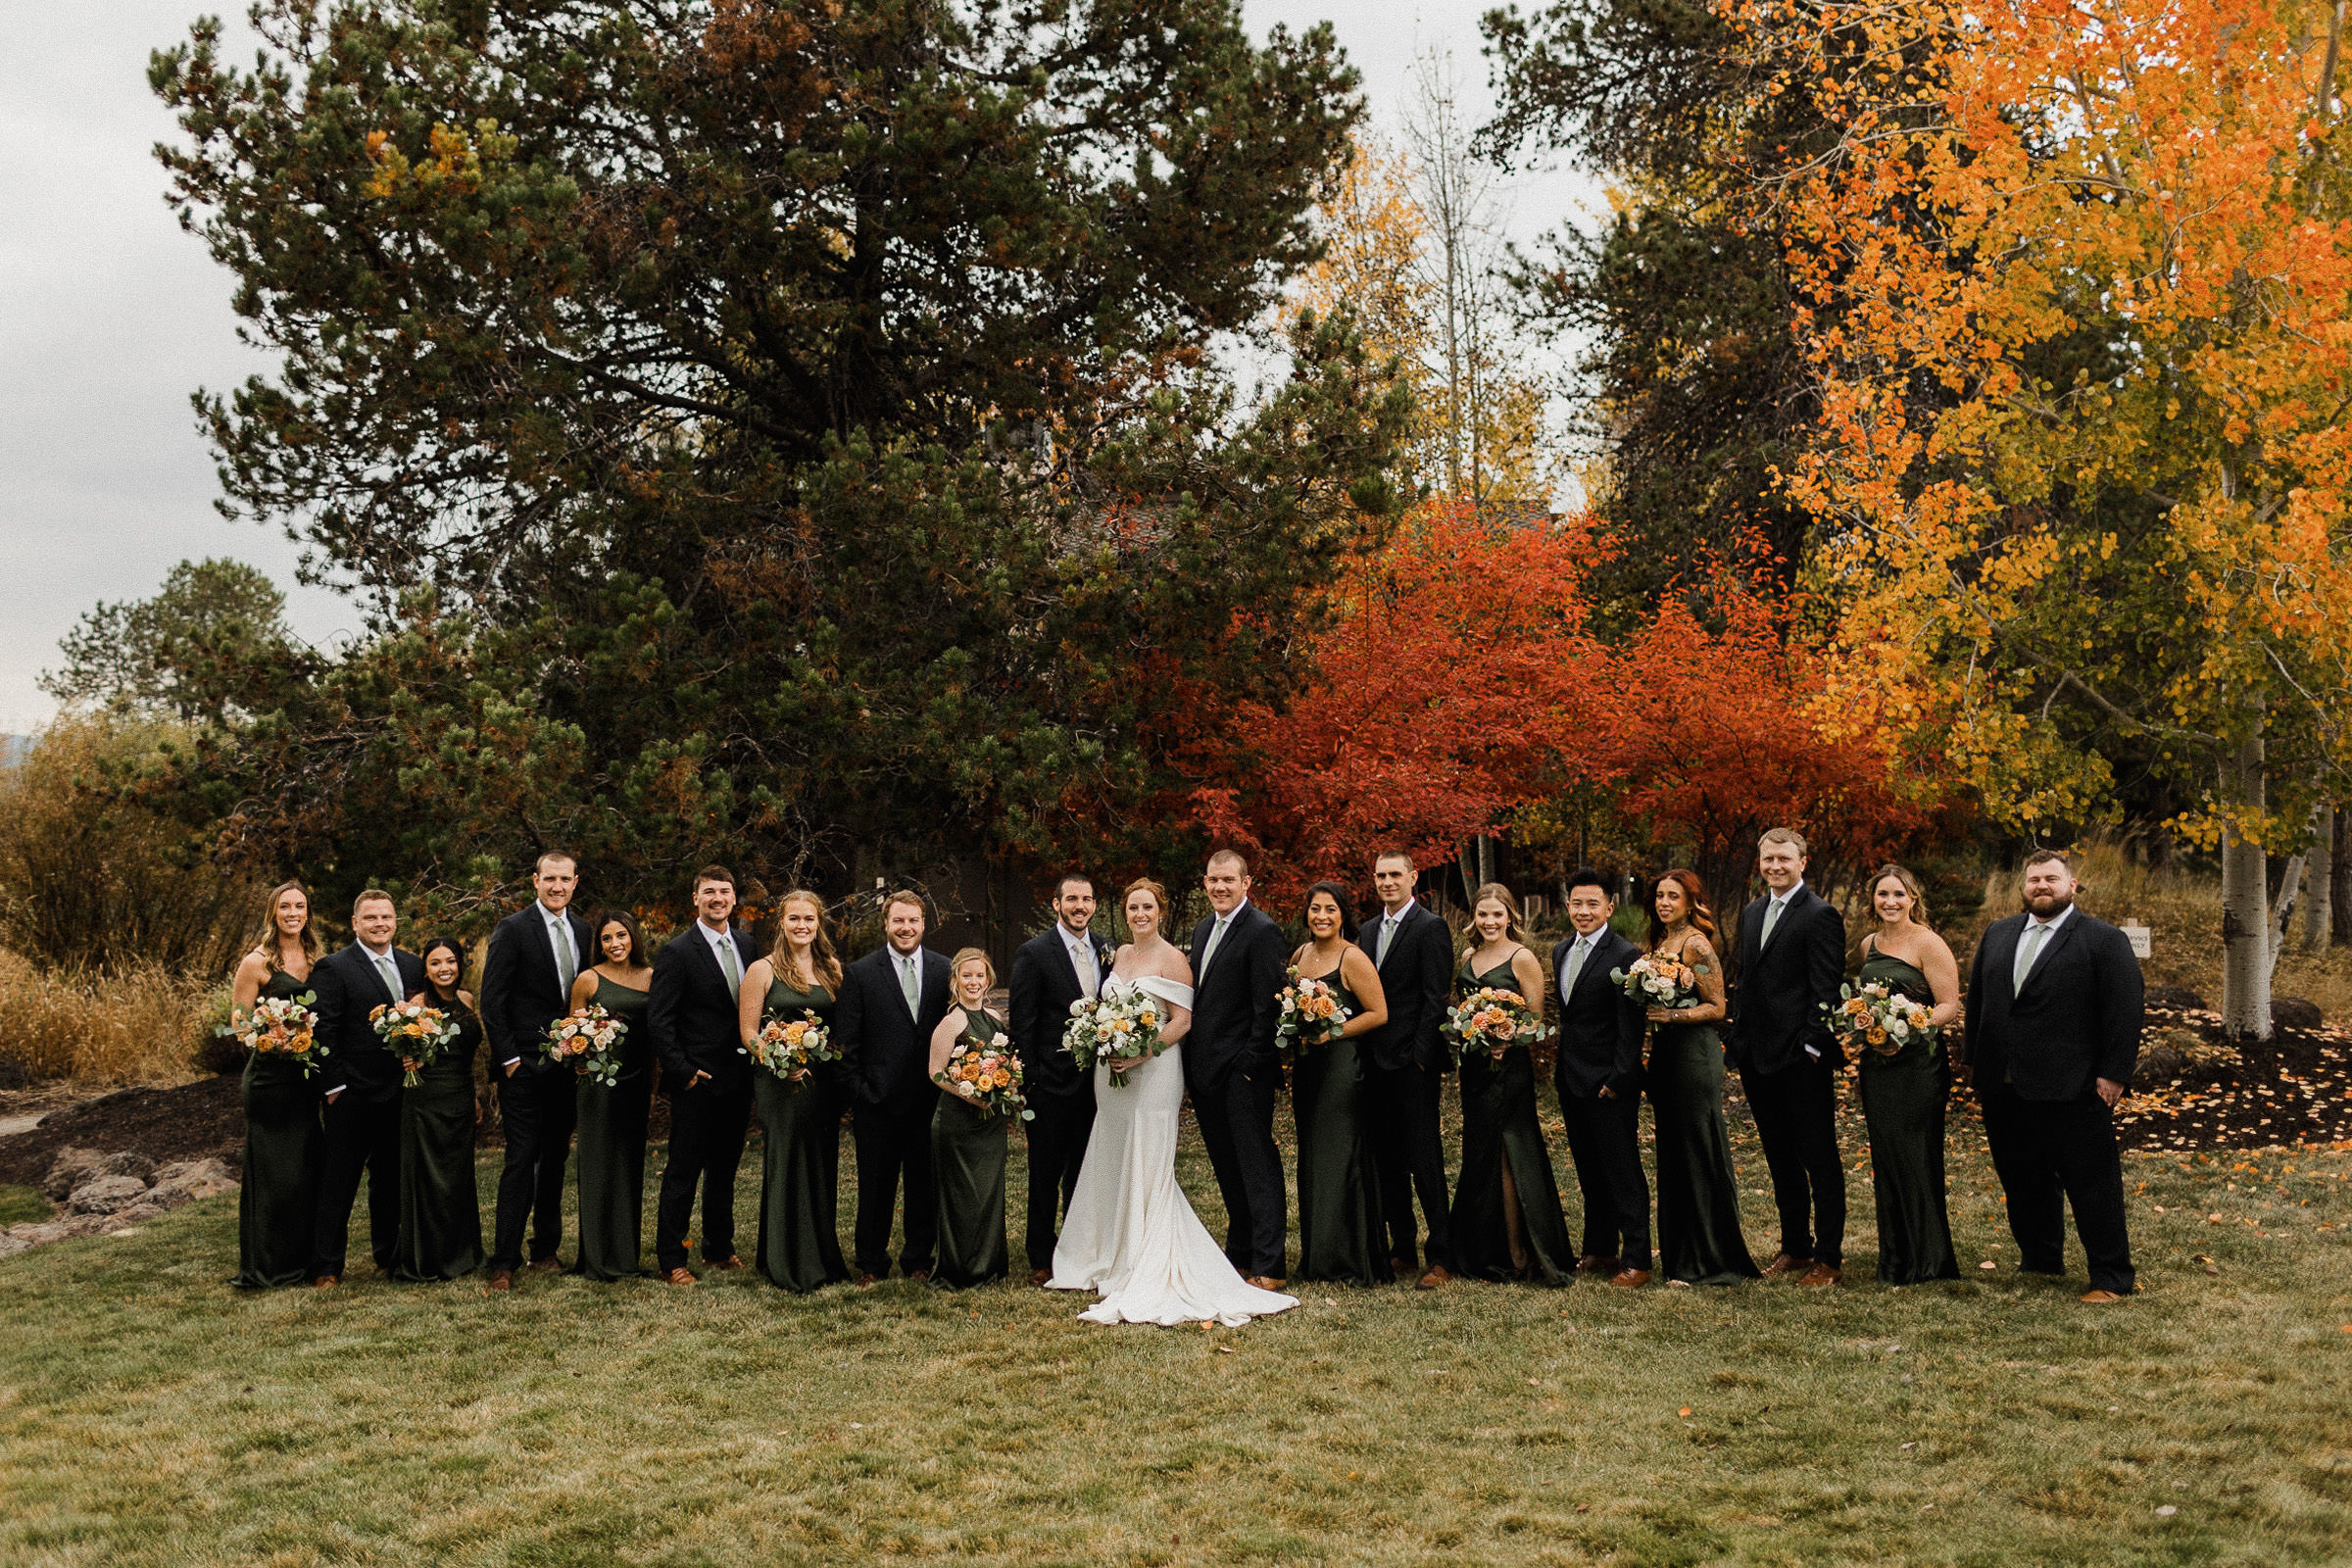 Wedding party poses for a portrait in front of fall foliage